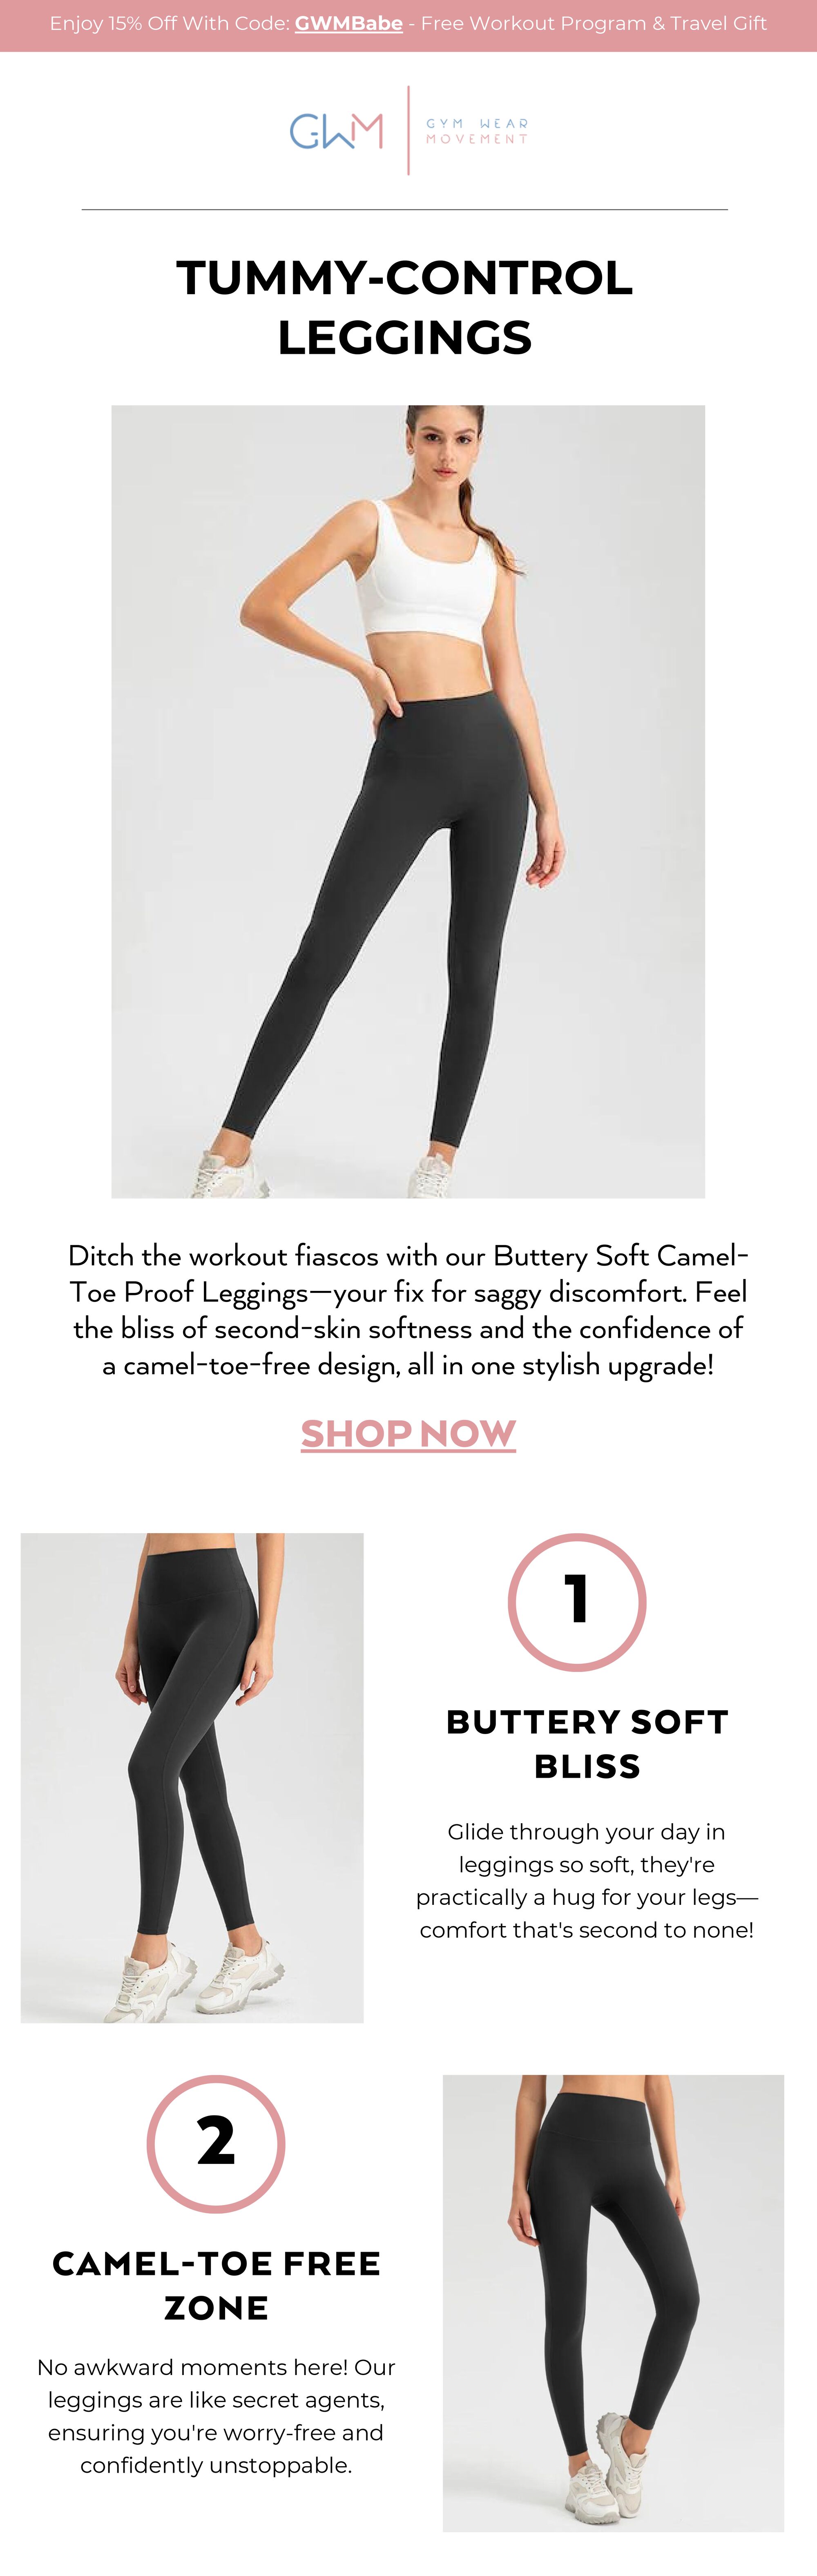 Say Goodbye to Camel Toe and Hello to Tummy-Slimming & Buttersoft